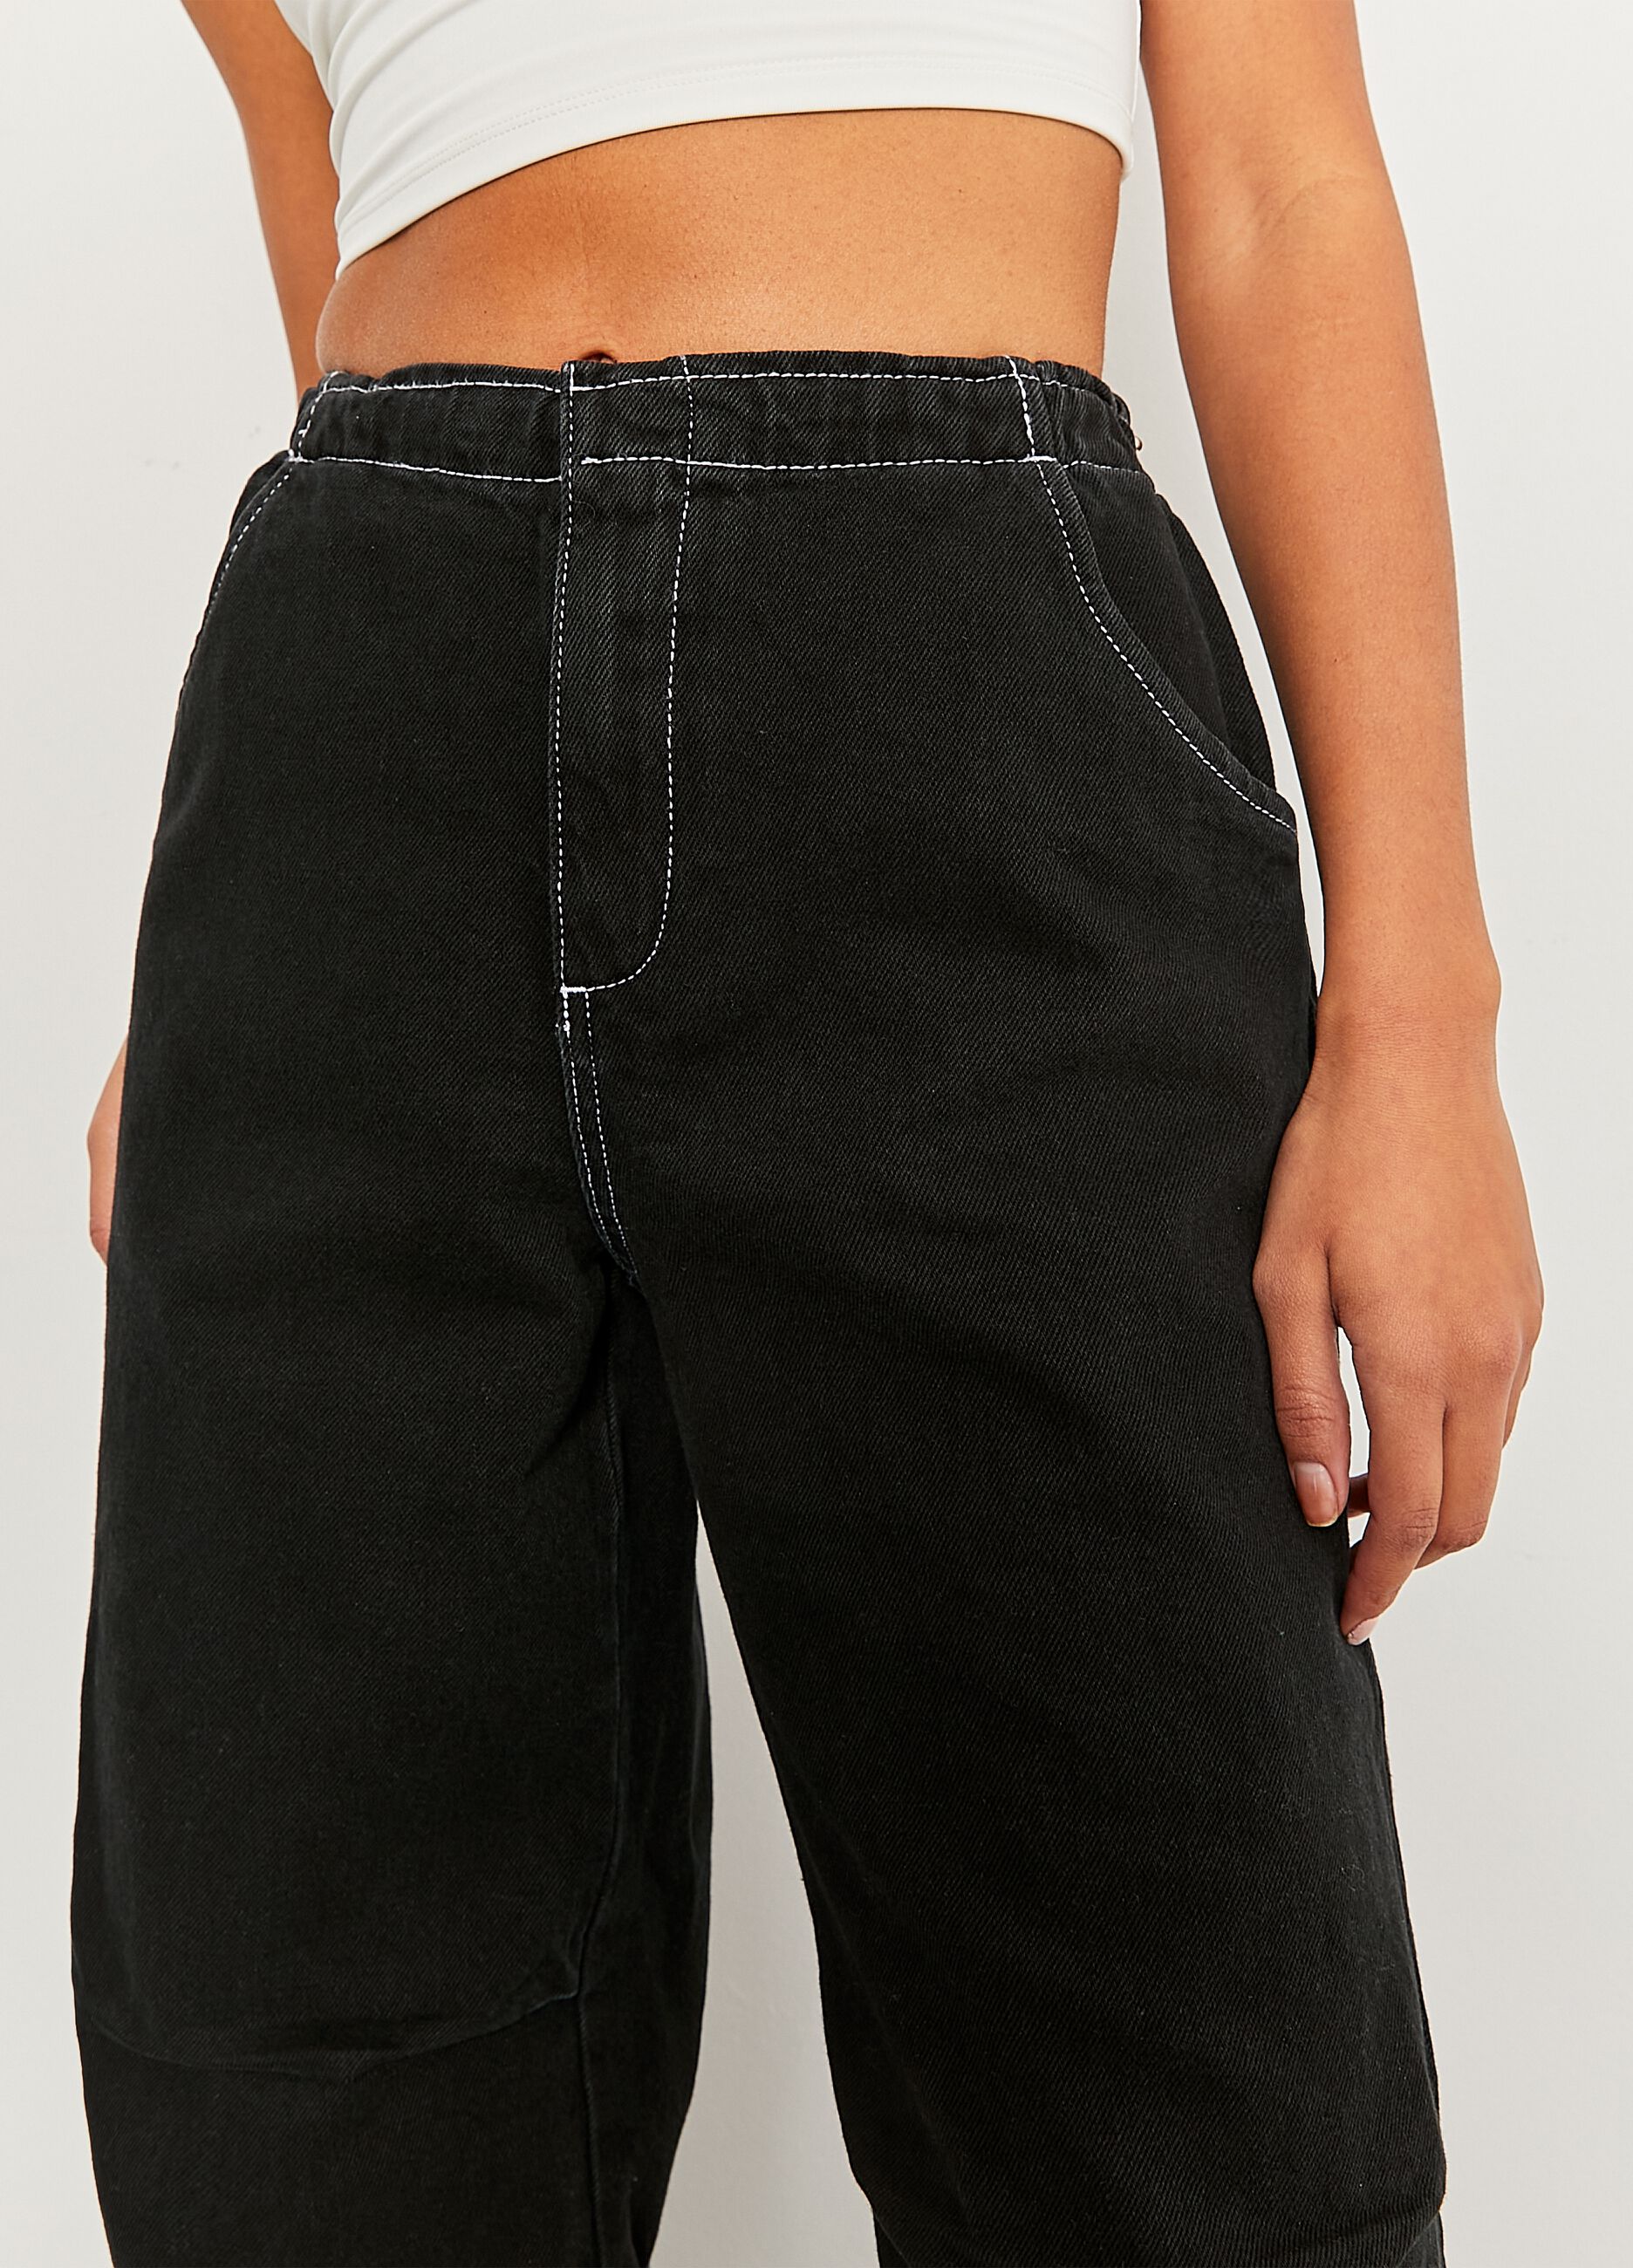 Parachute trousers in cotton_2